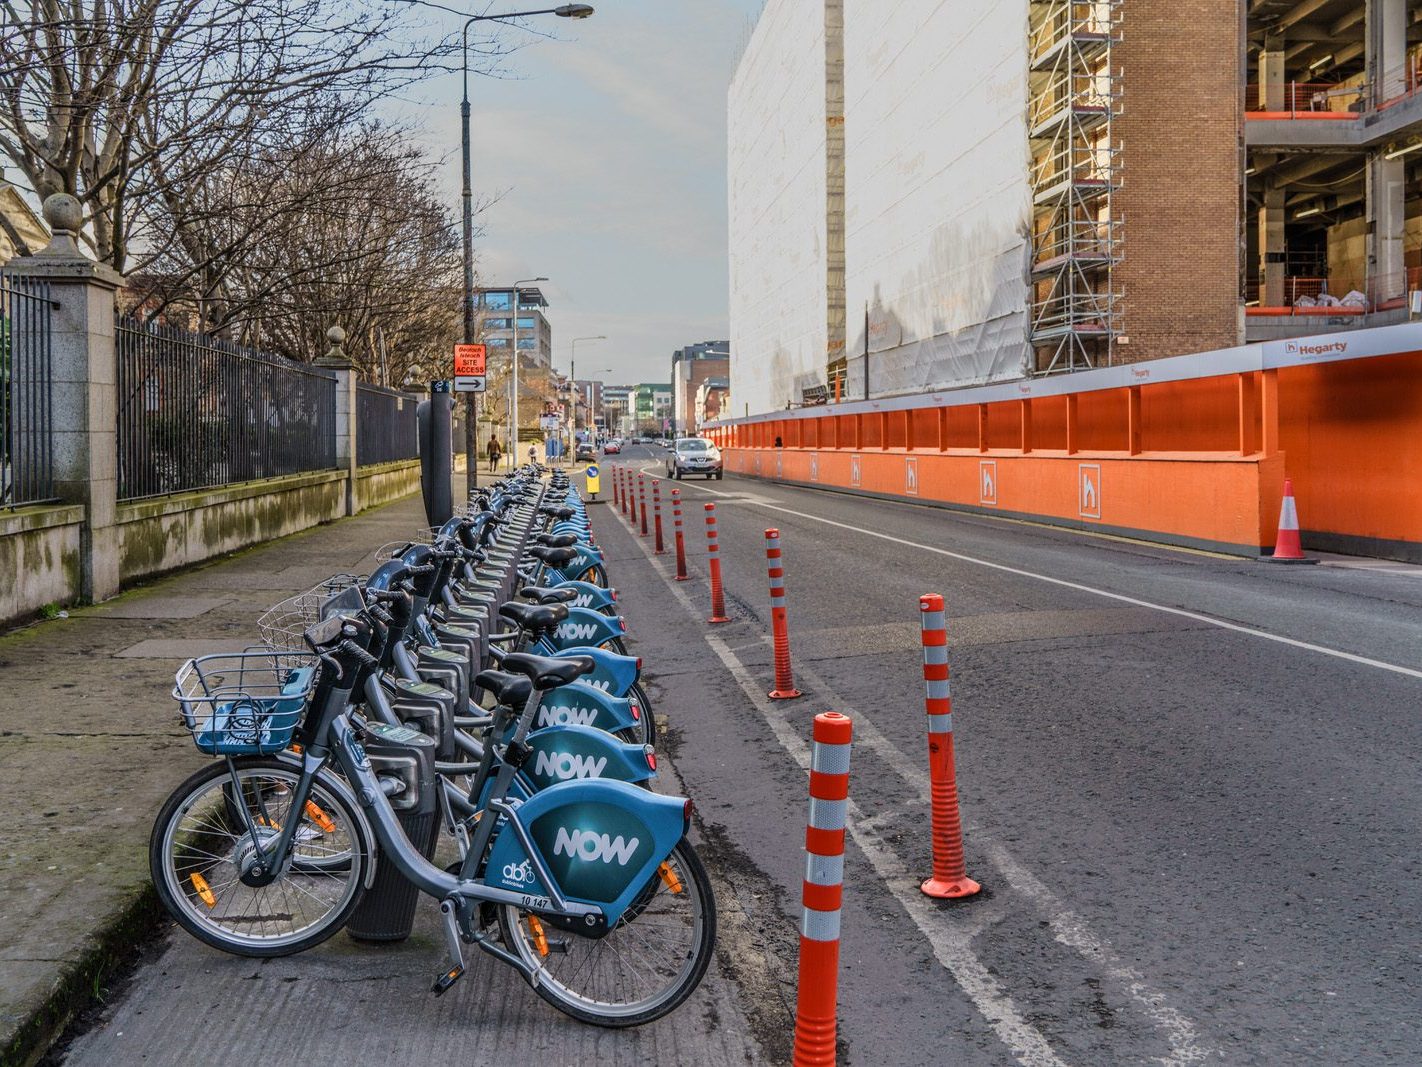 DUBLINBIKES DOCKING STATION 14 [ACROSS THE STREET FROM THE GOOGLE BUILDING ON GRAND CANAL STREET]-228198-1